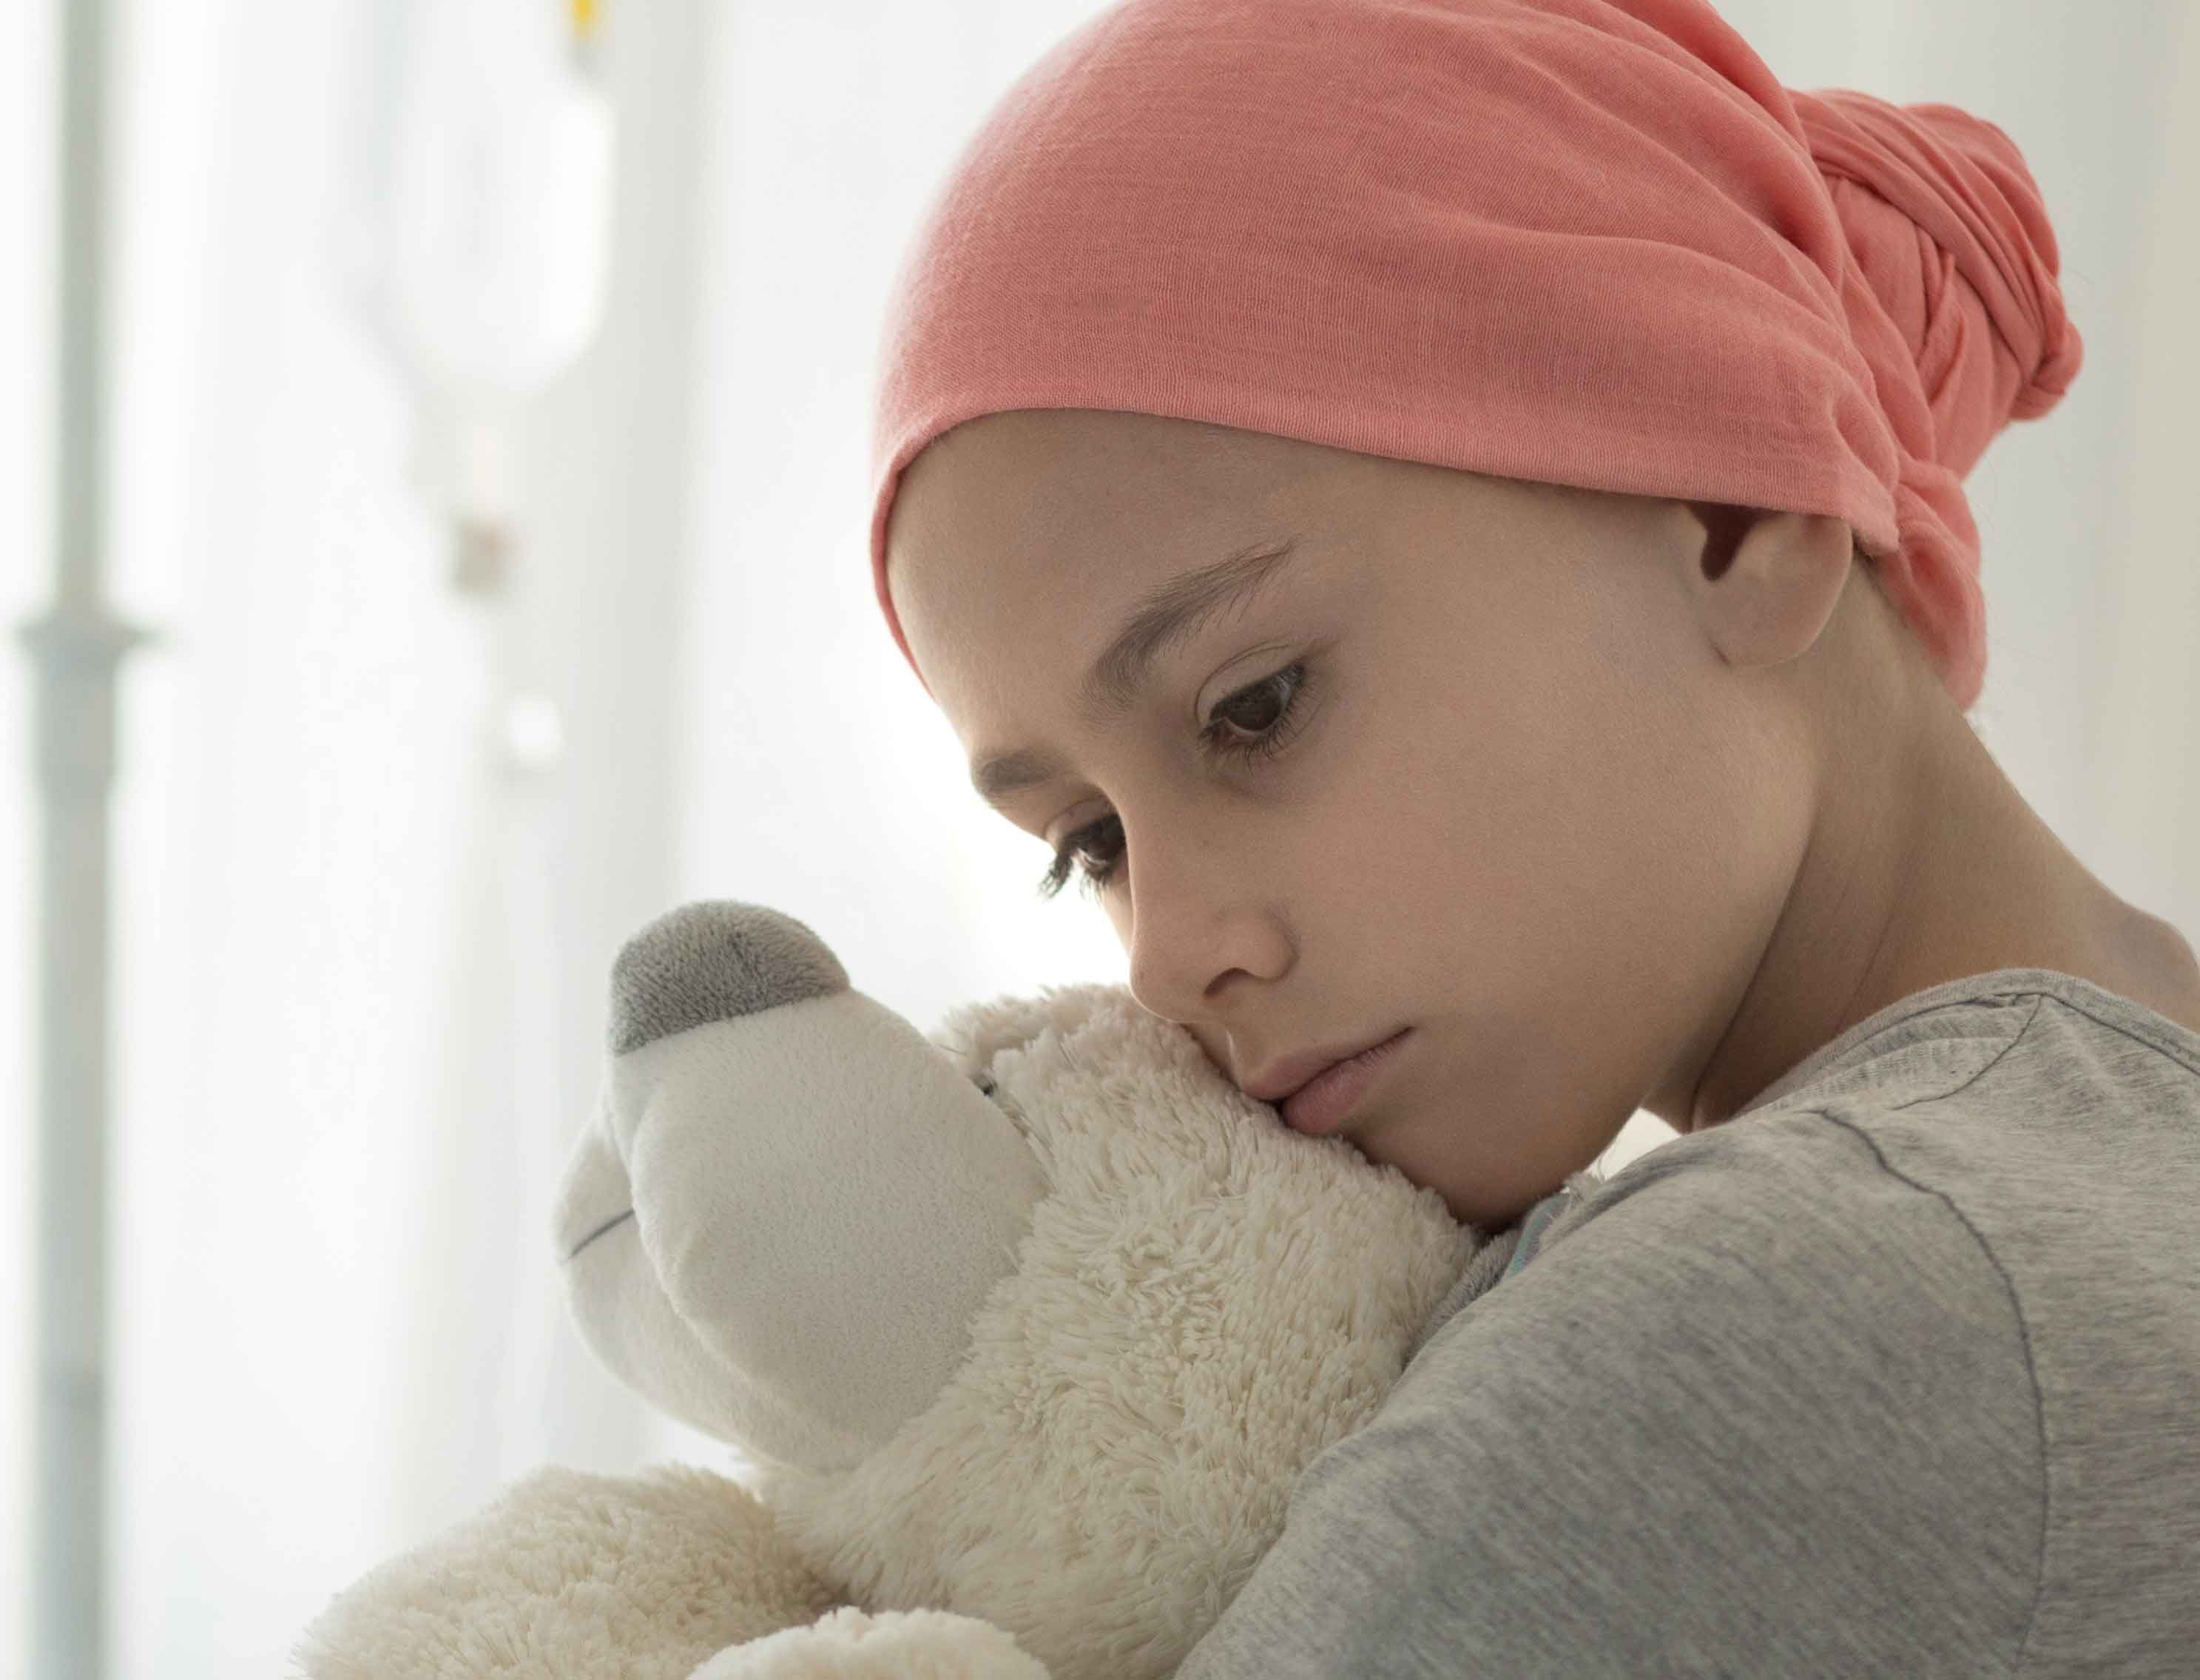 Weak Girl With Cancer Wearing Pink Headscarf And Hugging Teddy Bear